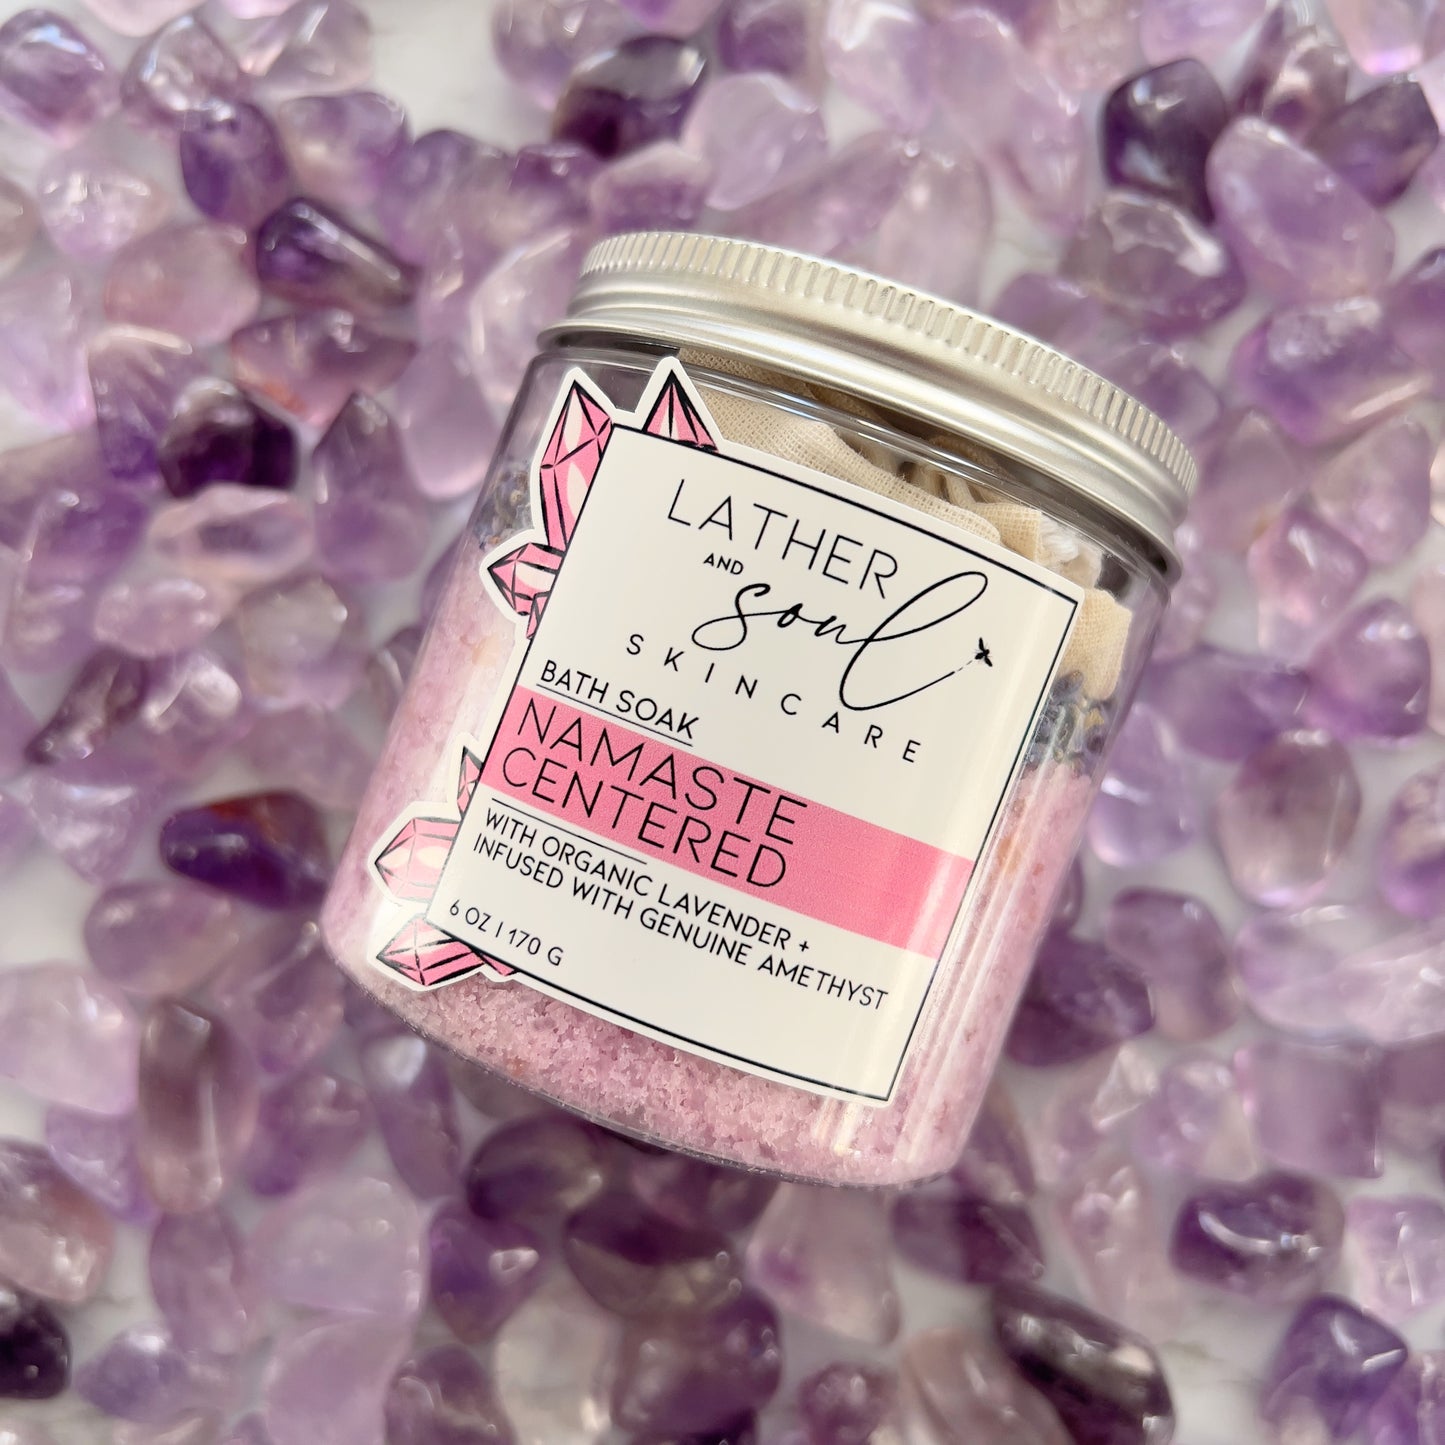 Bath salts with amethyst crystals and lavender by Lather + Soul